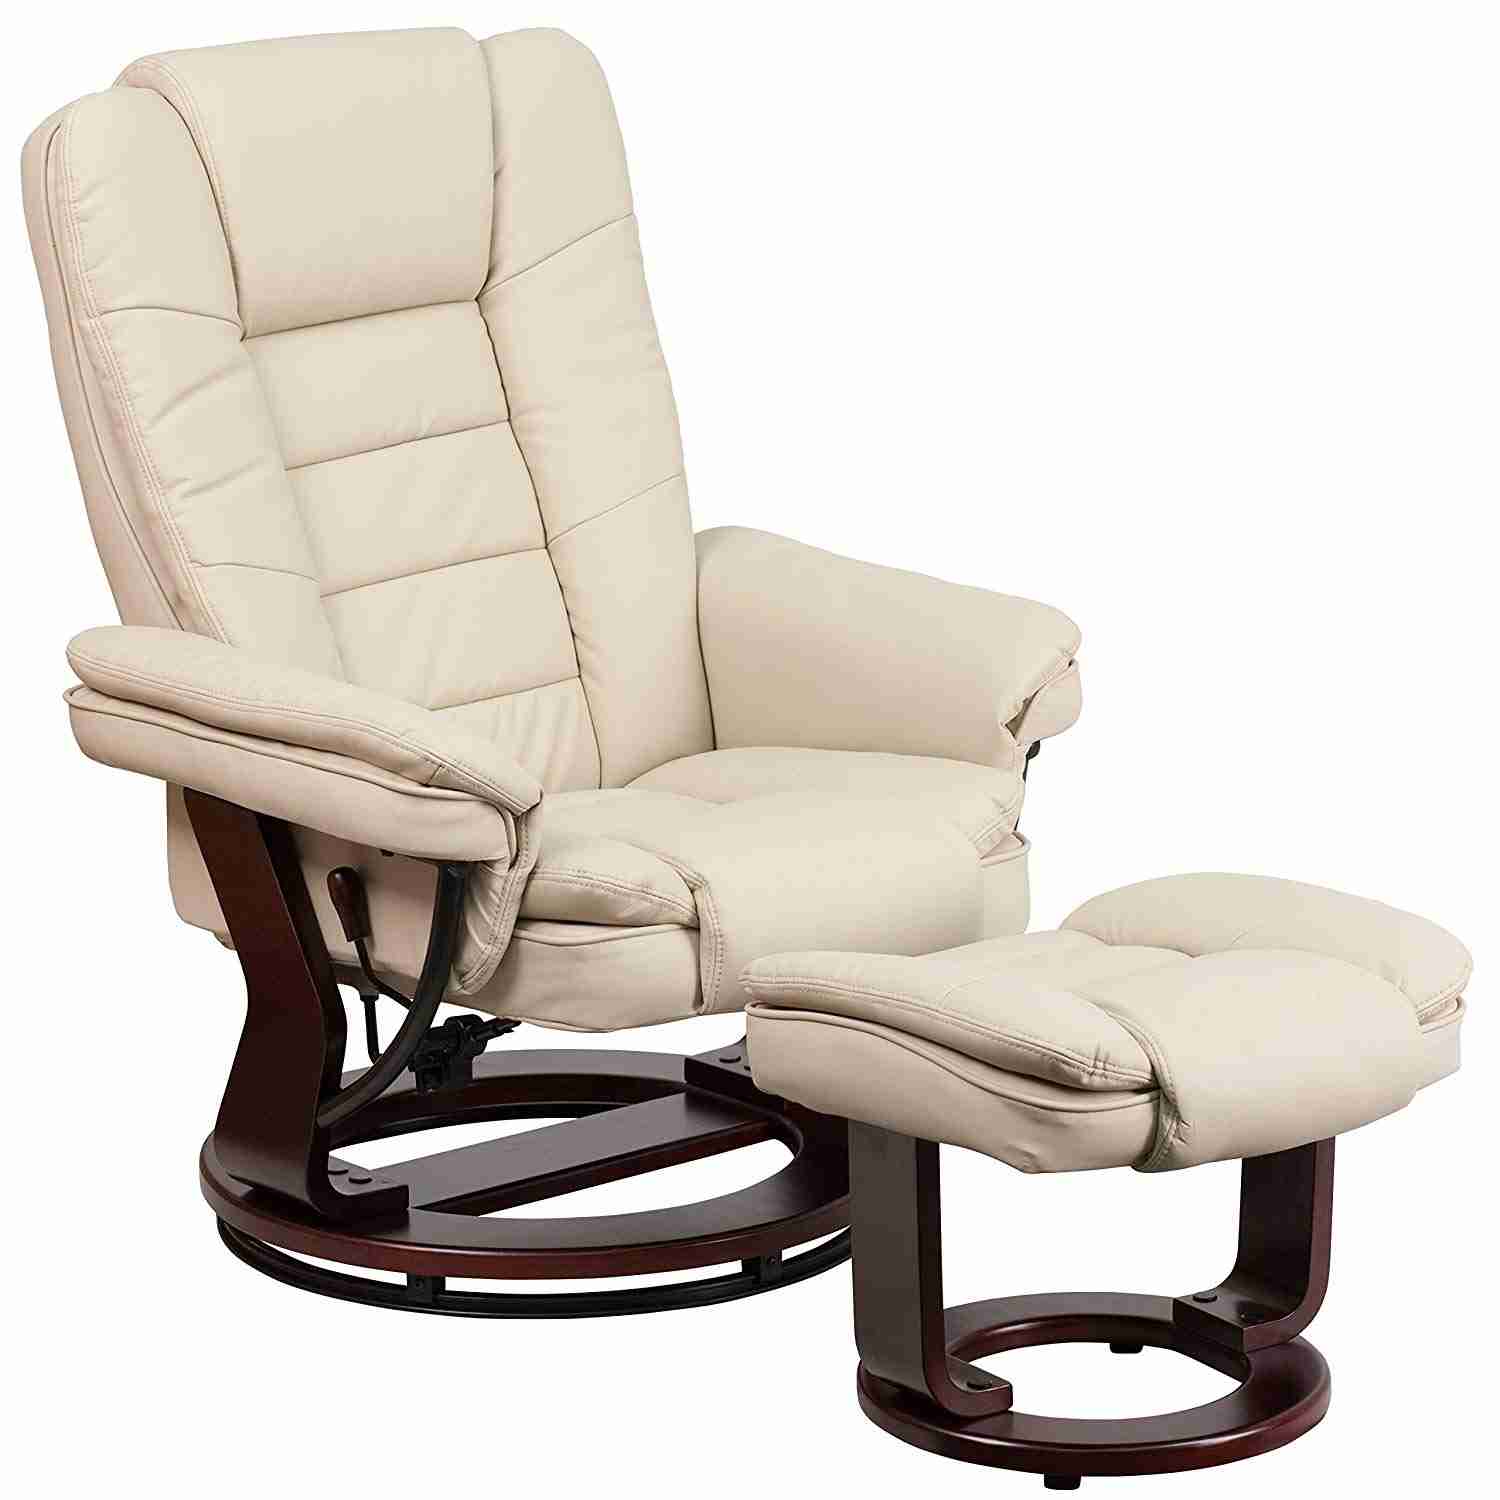 10 Best Recliners under $300 You Won't be able to Live Without